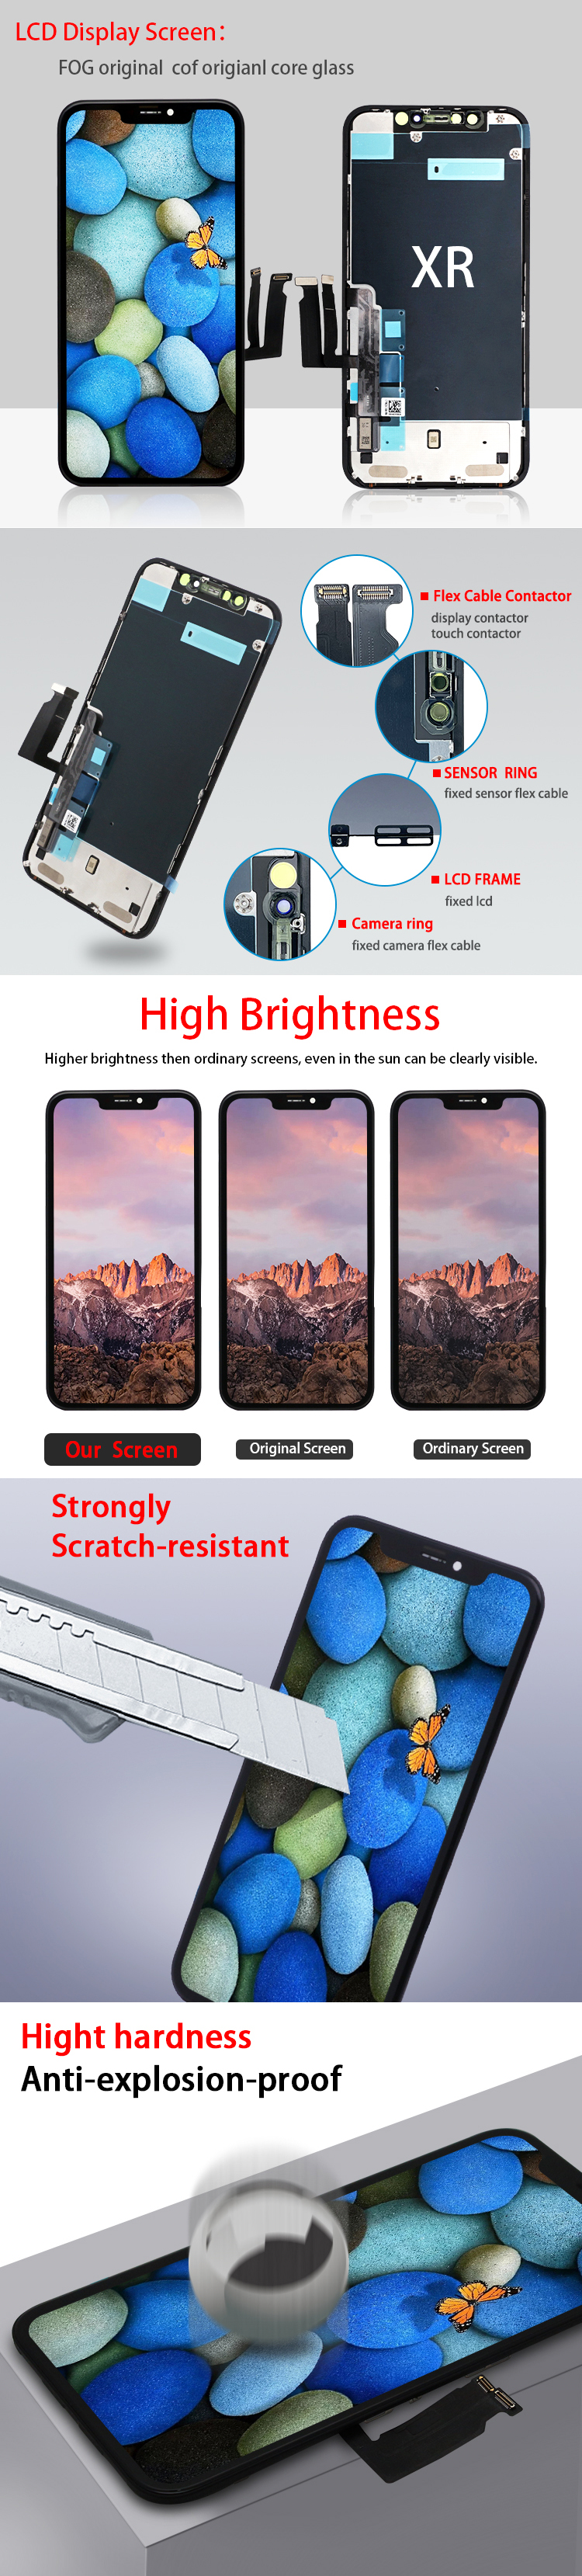 LCD សម្រាប់ iPhone xr